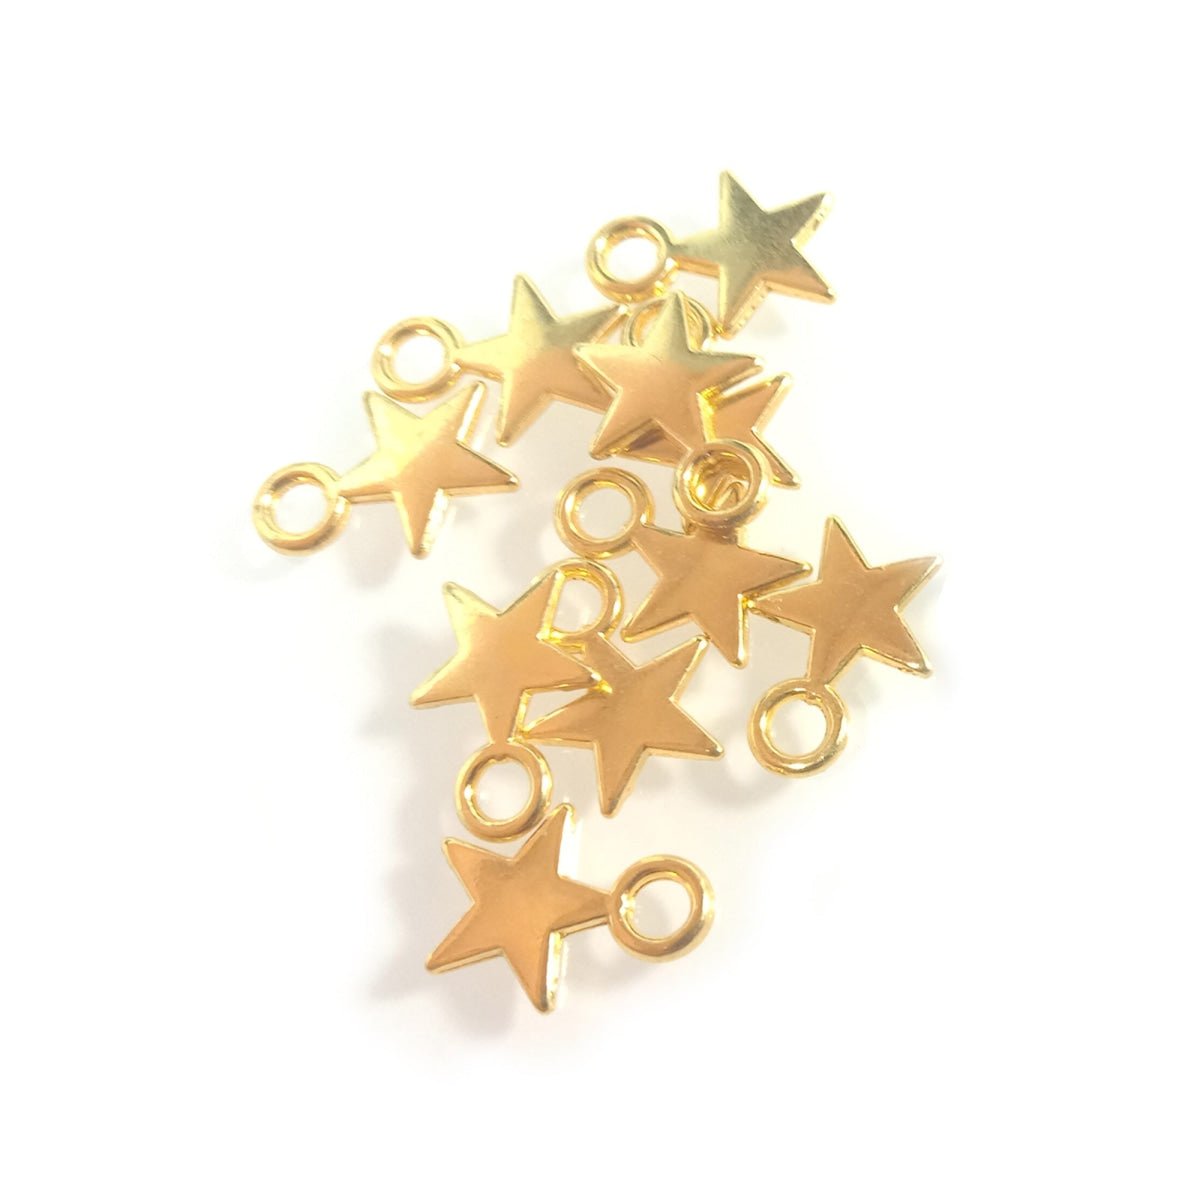 10pcs Stars Silver Gold Colour Tiny For DIY Necklaces Bracelets Pendants Charms - Gold - - Asia Sell